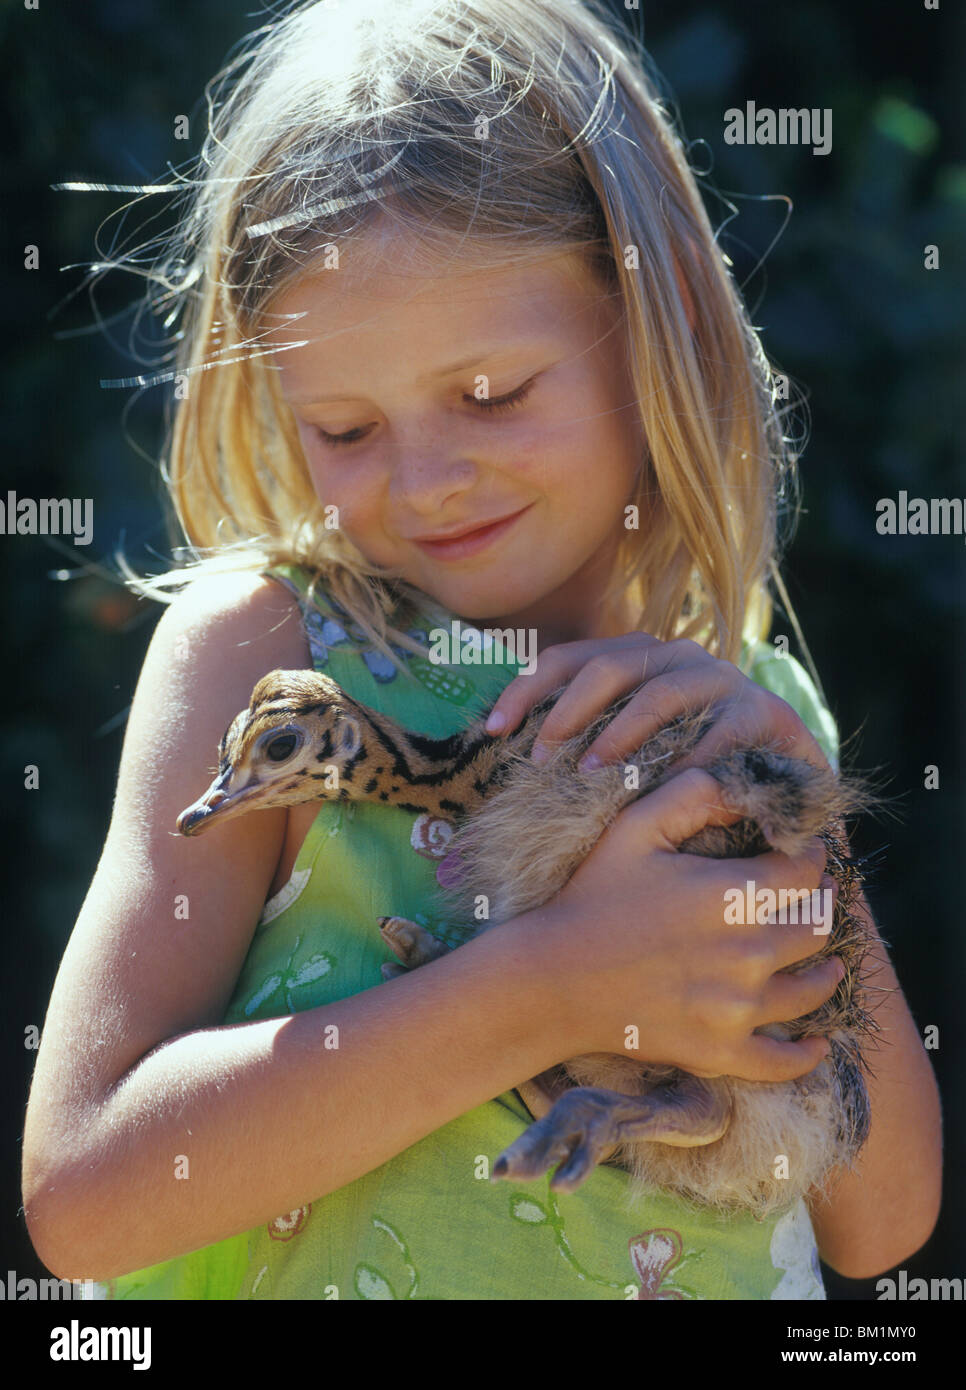 Girl 7 yrs holding baby ostrich in arms ostrich Struthio camelus is large flightless bird native to Africa SOUTH AFRICA Cape Stock Photo